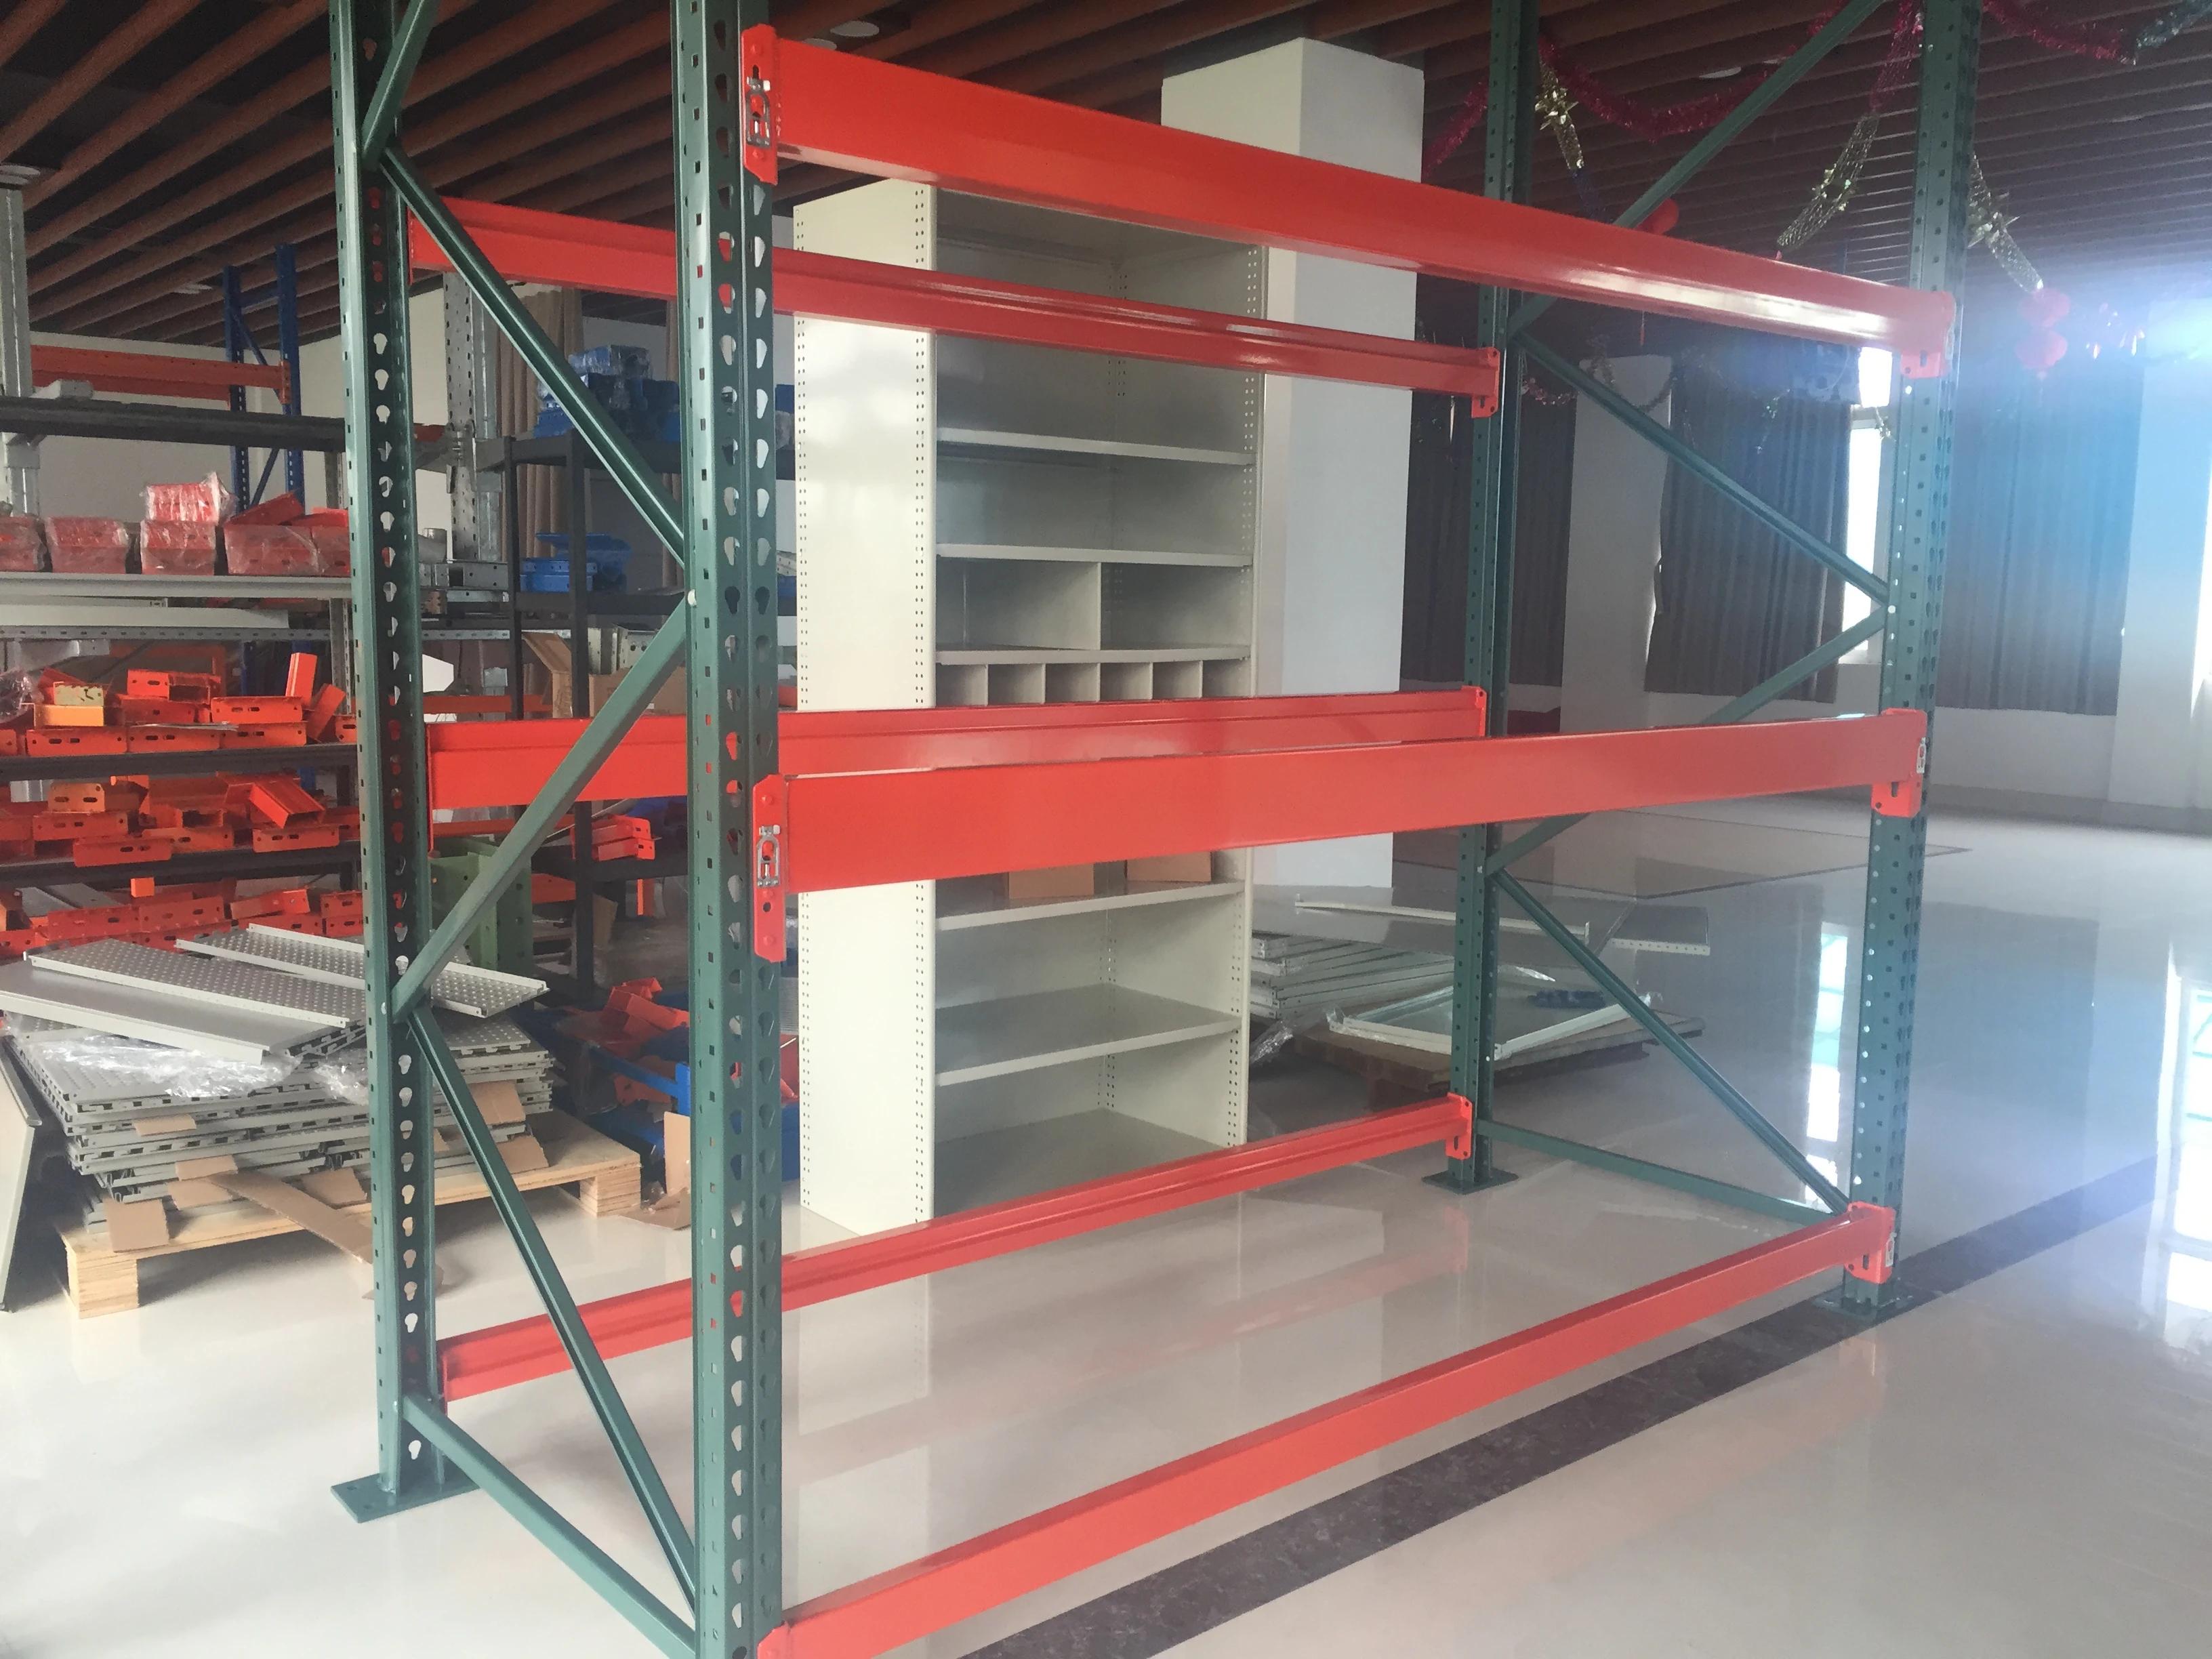 Widely used metal rack pallet cold storage warehouses pallet racking